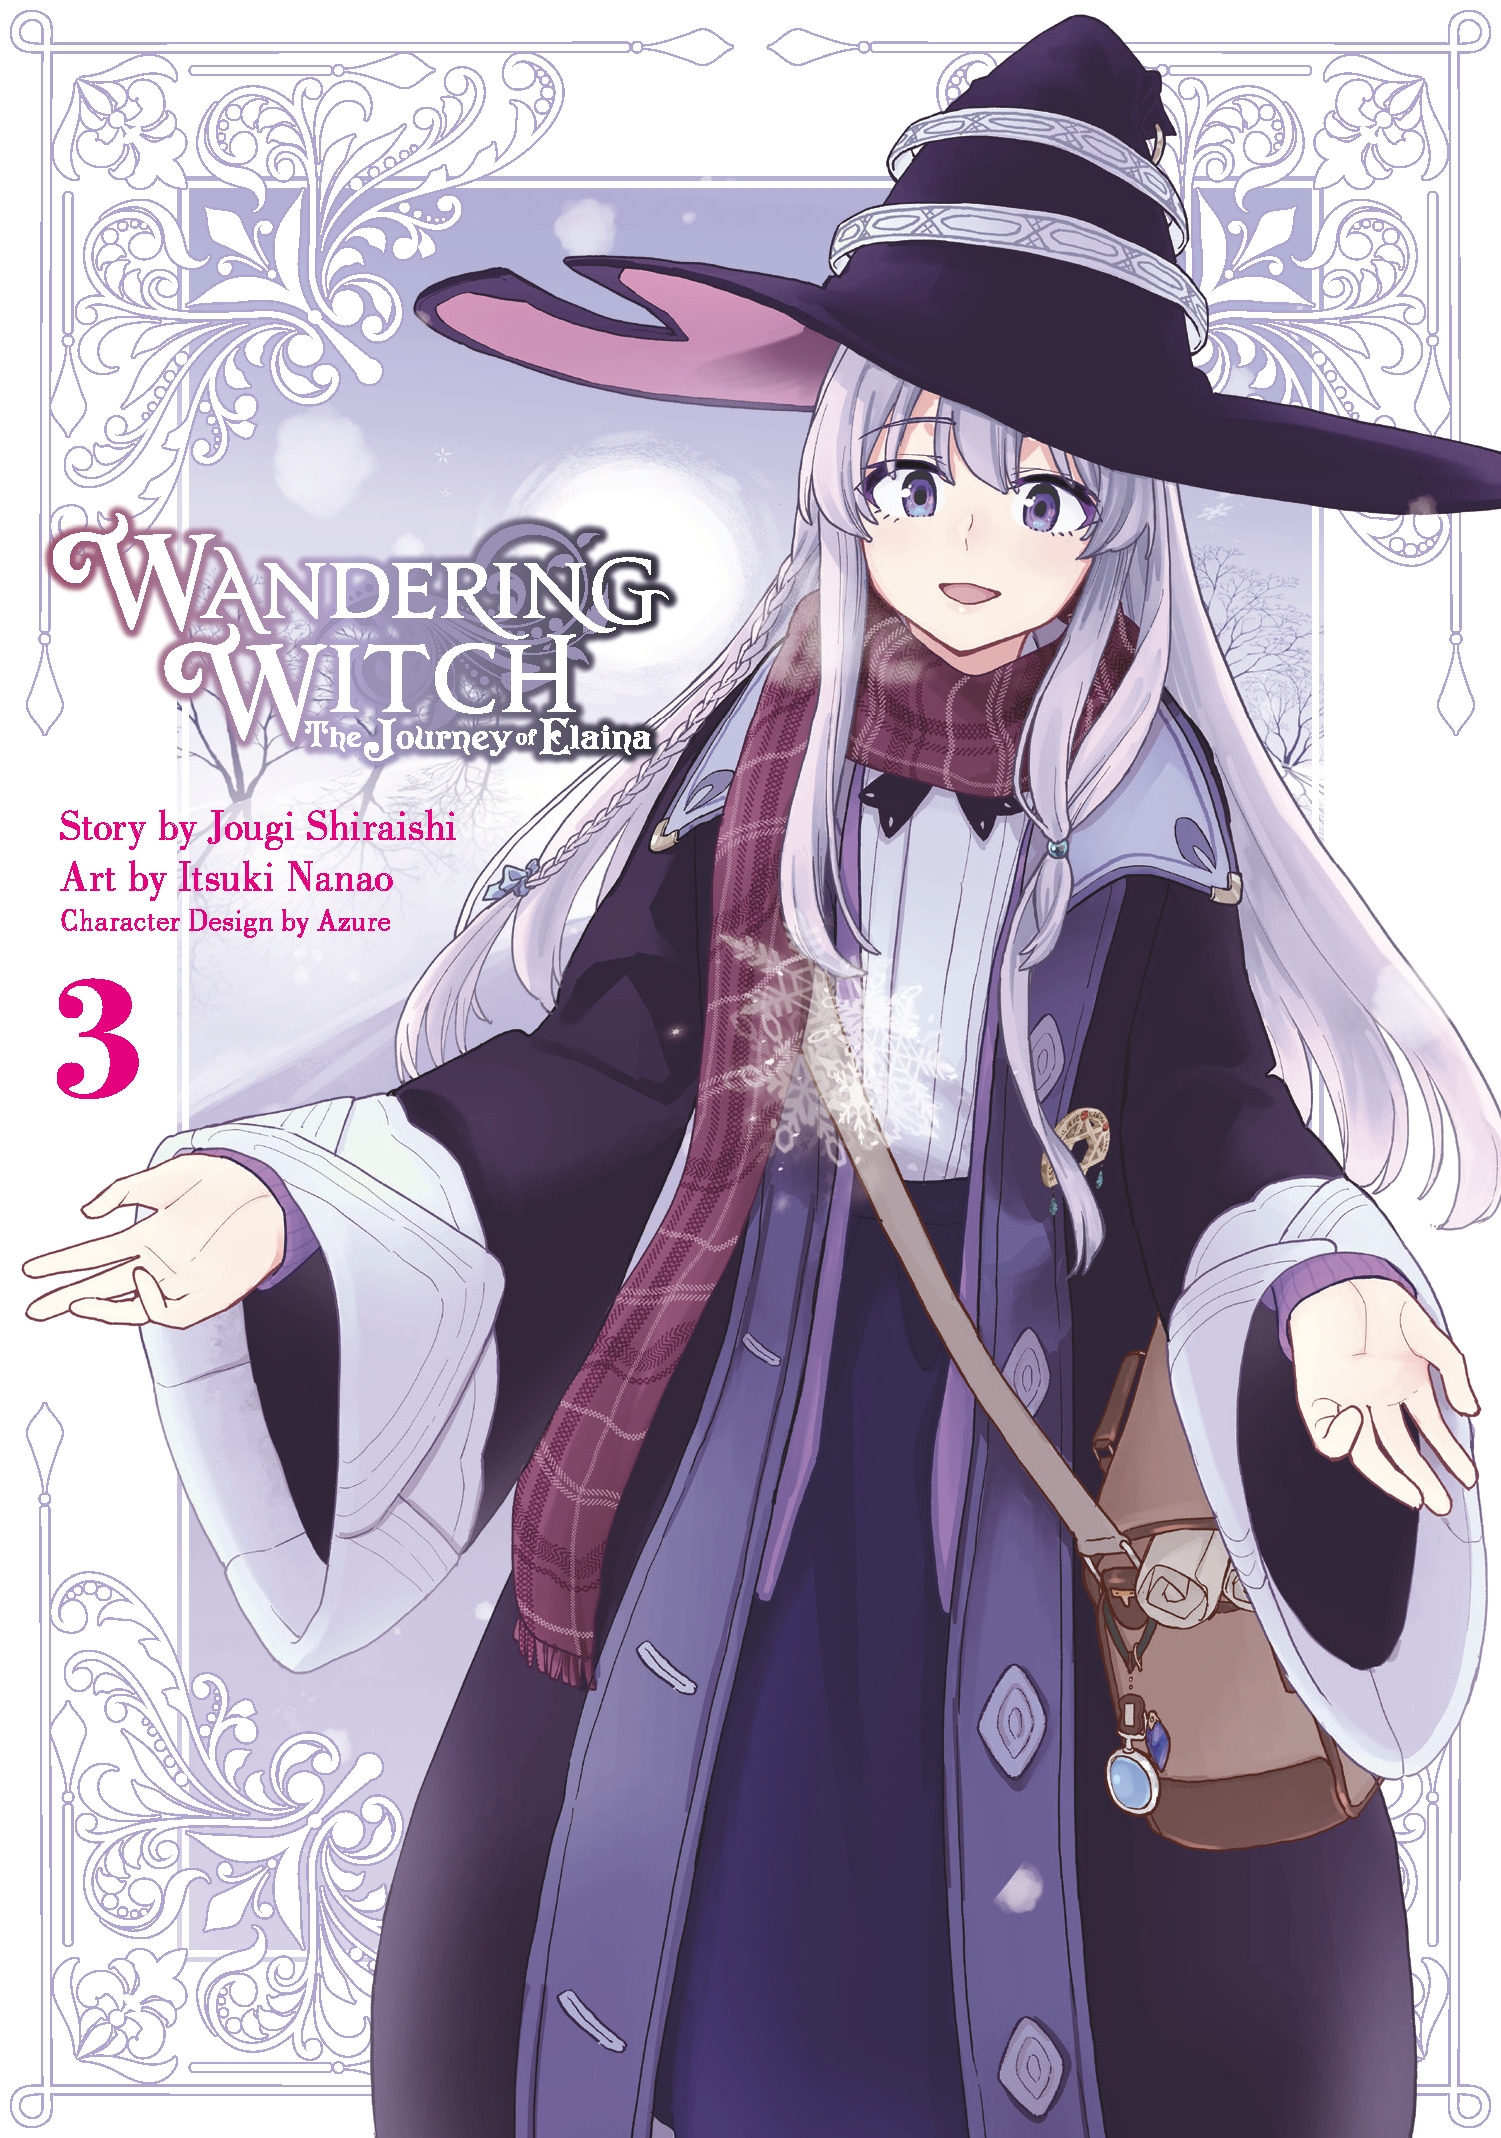 wandering witch anime genre